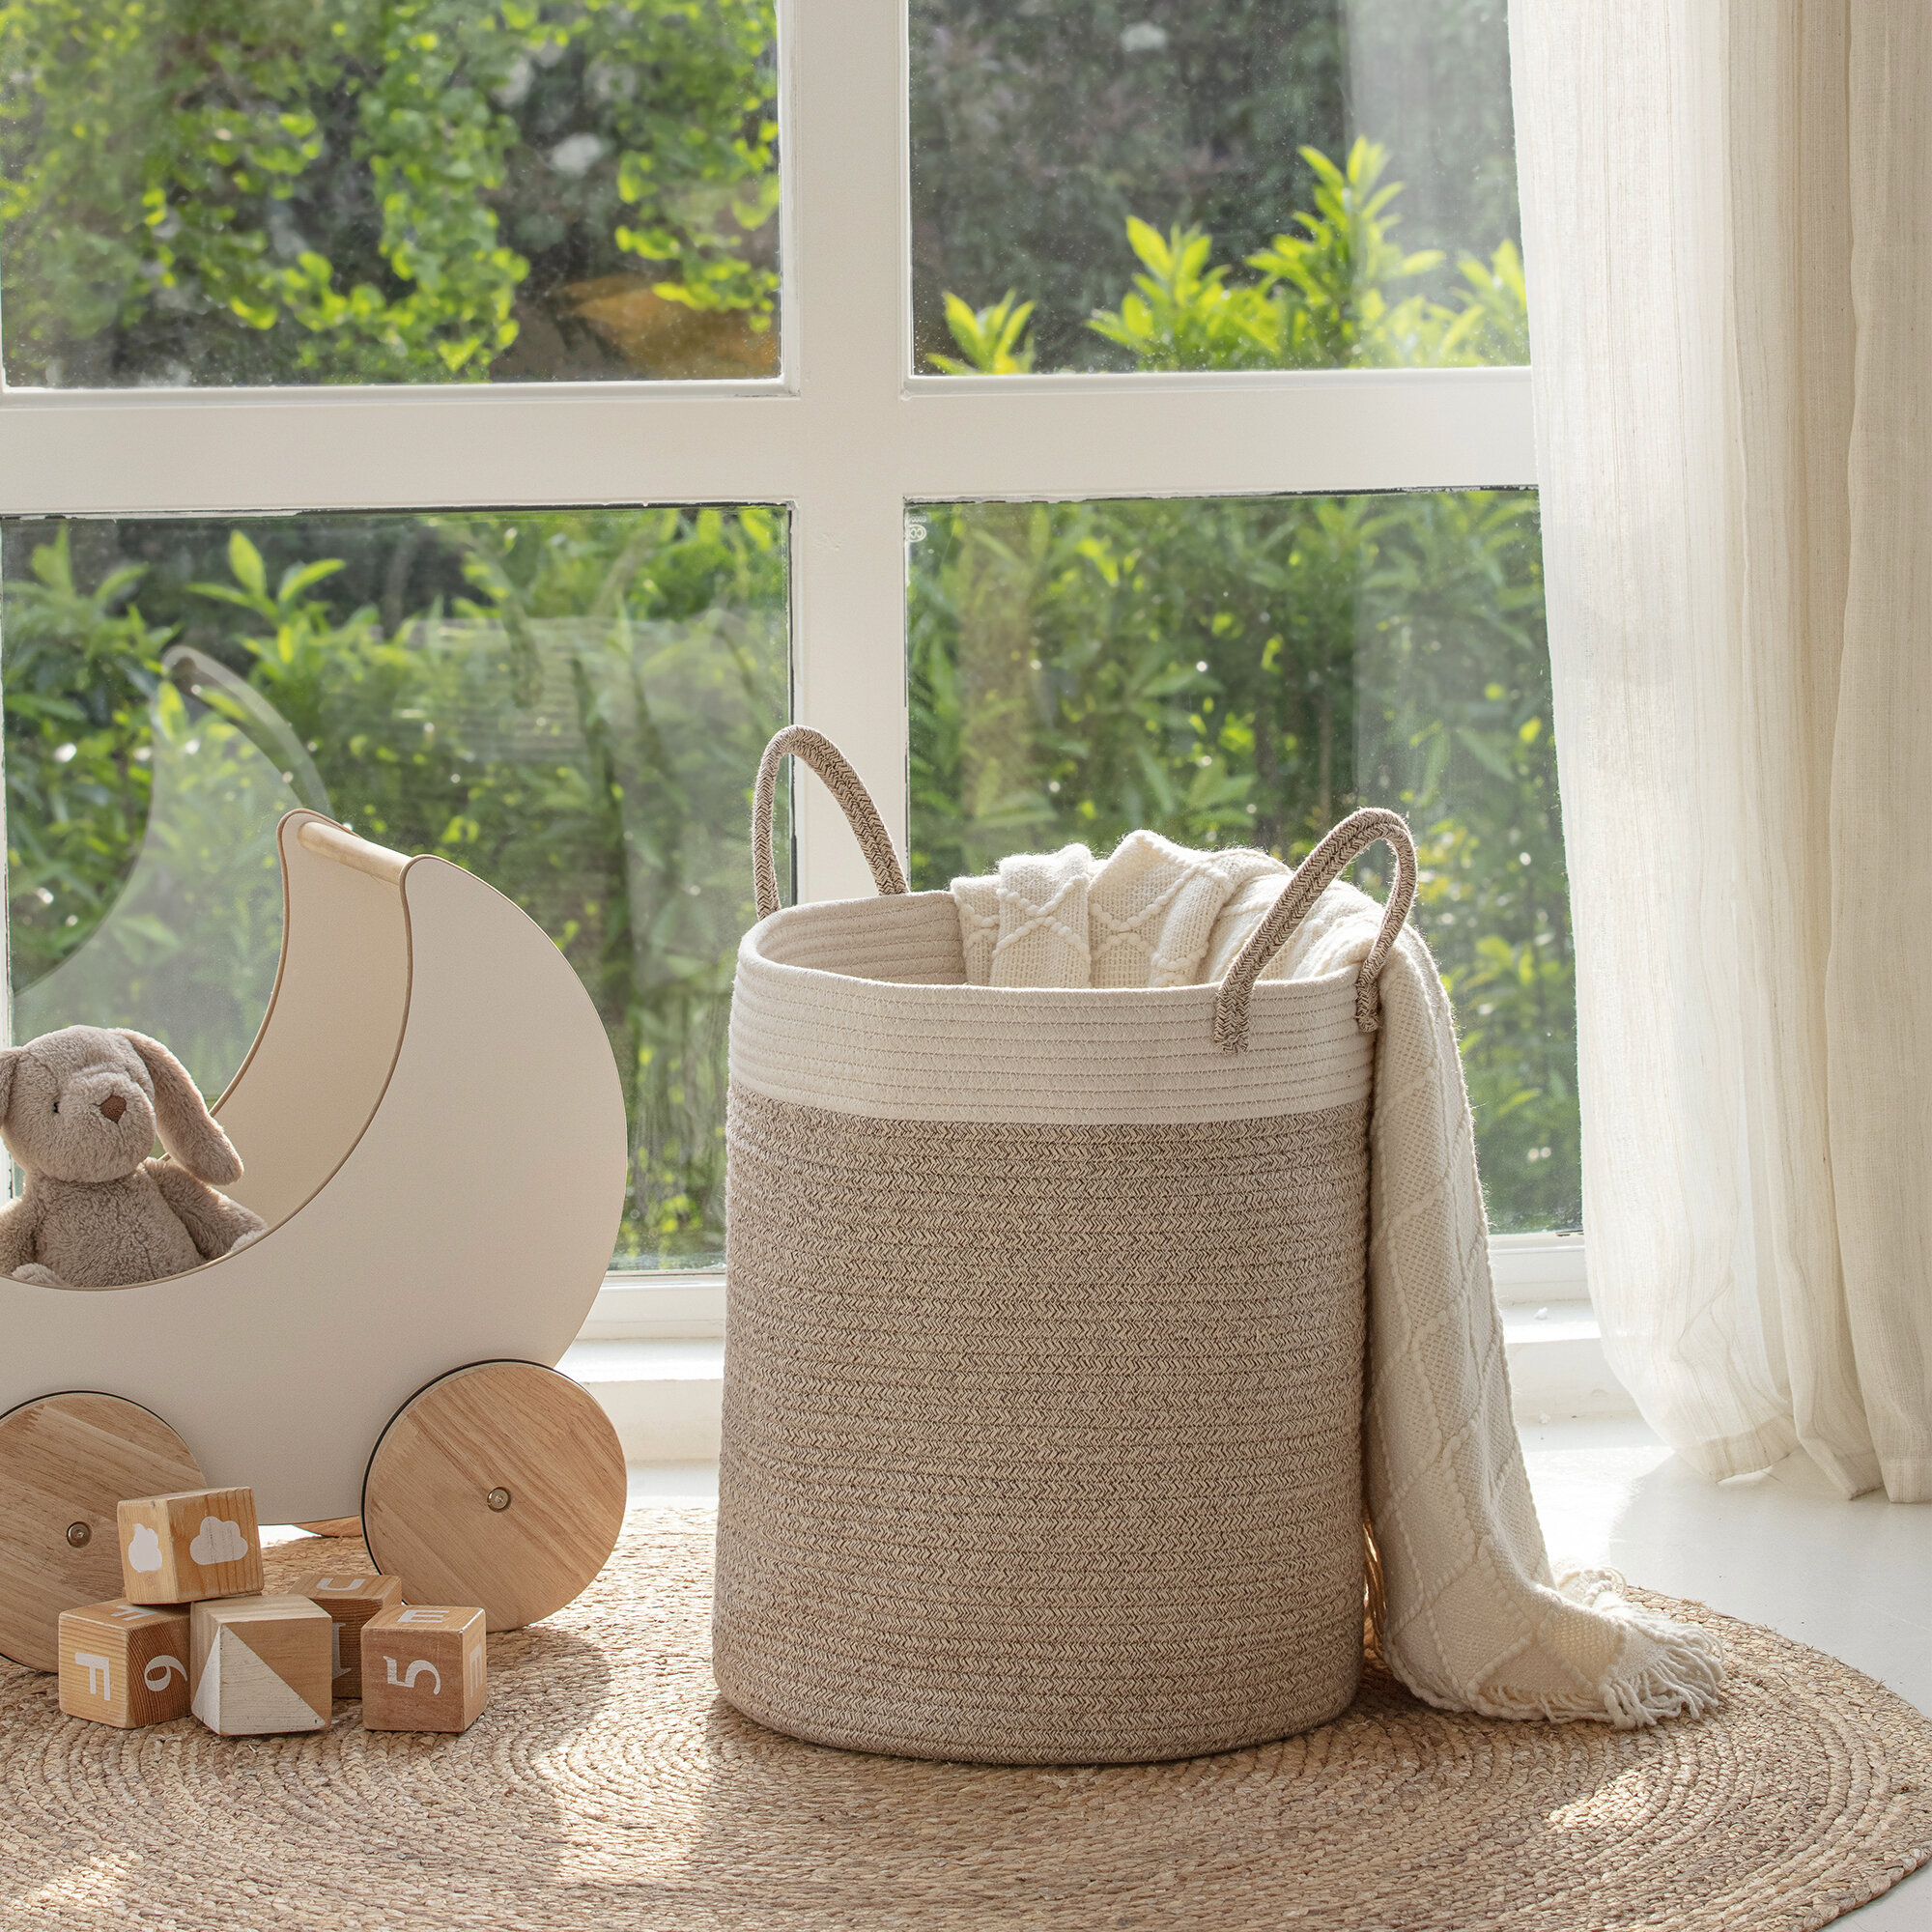 Basket | Dovecove Wayfair Fabric & Reviews Althoff Rope Storage